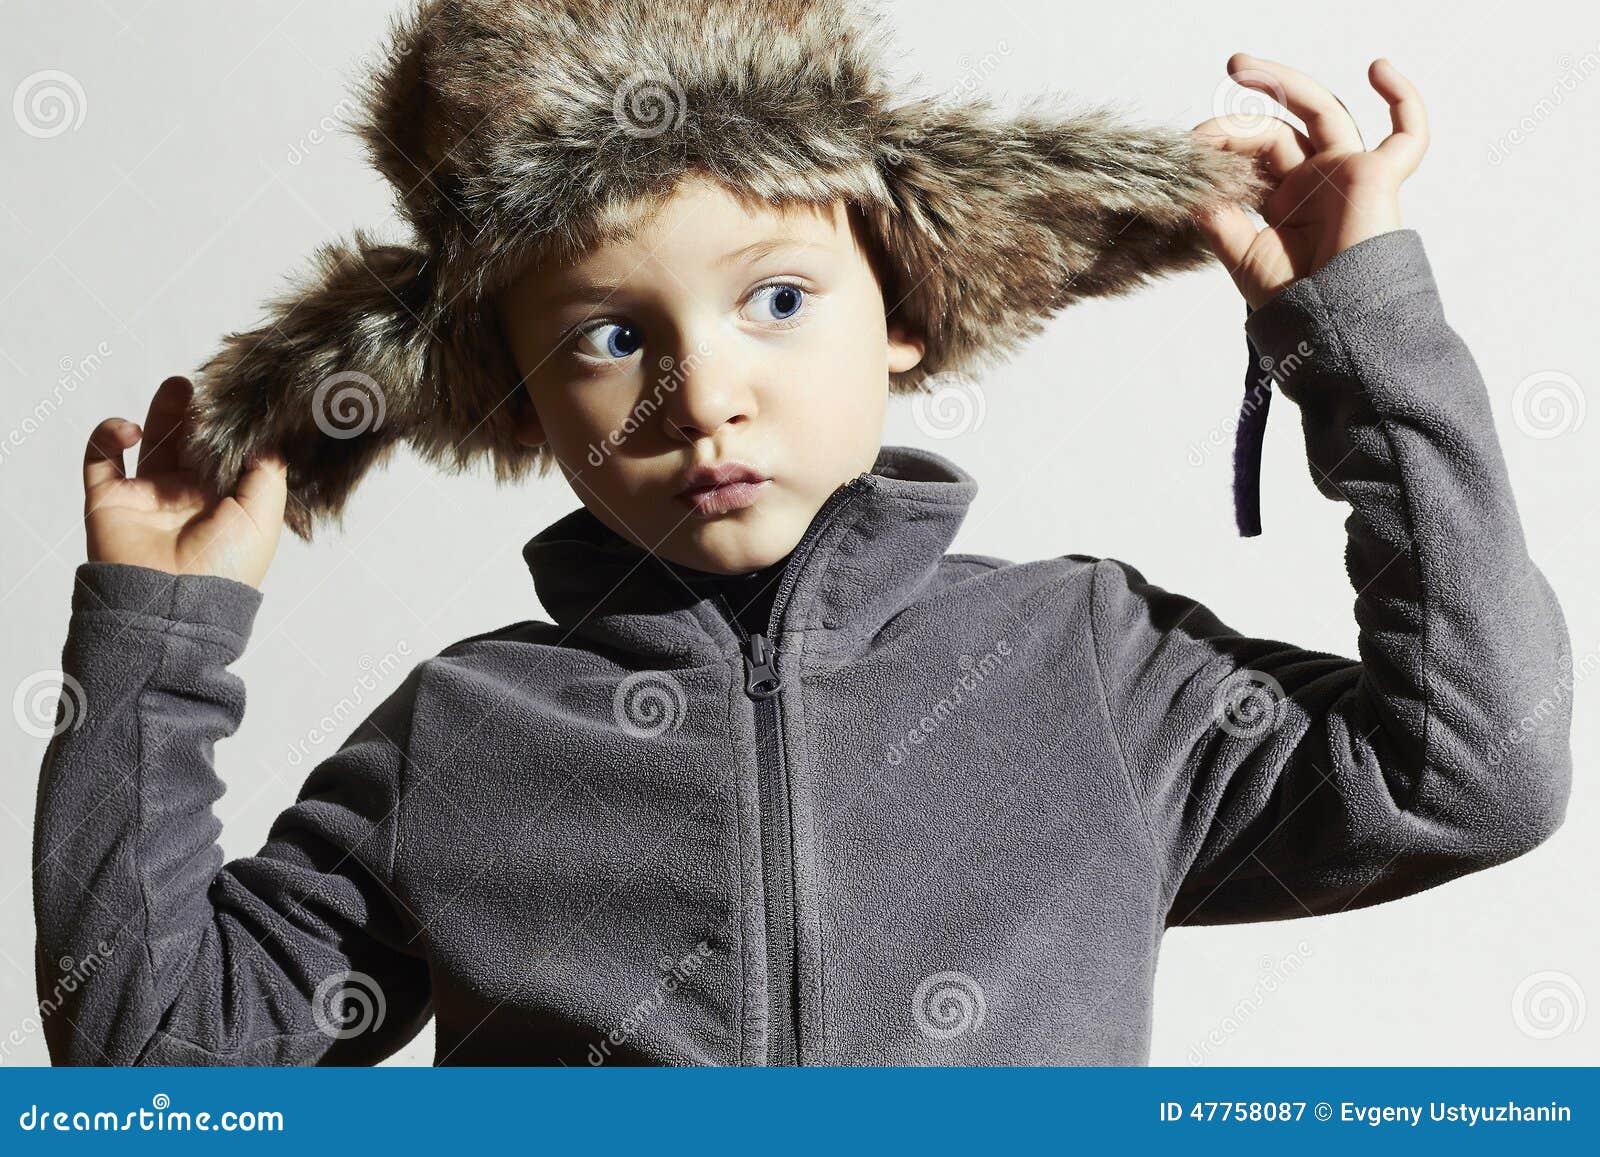 Funny Child in Fur Hat.Kids Fashion Casual Winter Style.little Boy ...